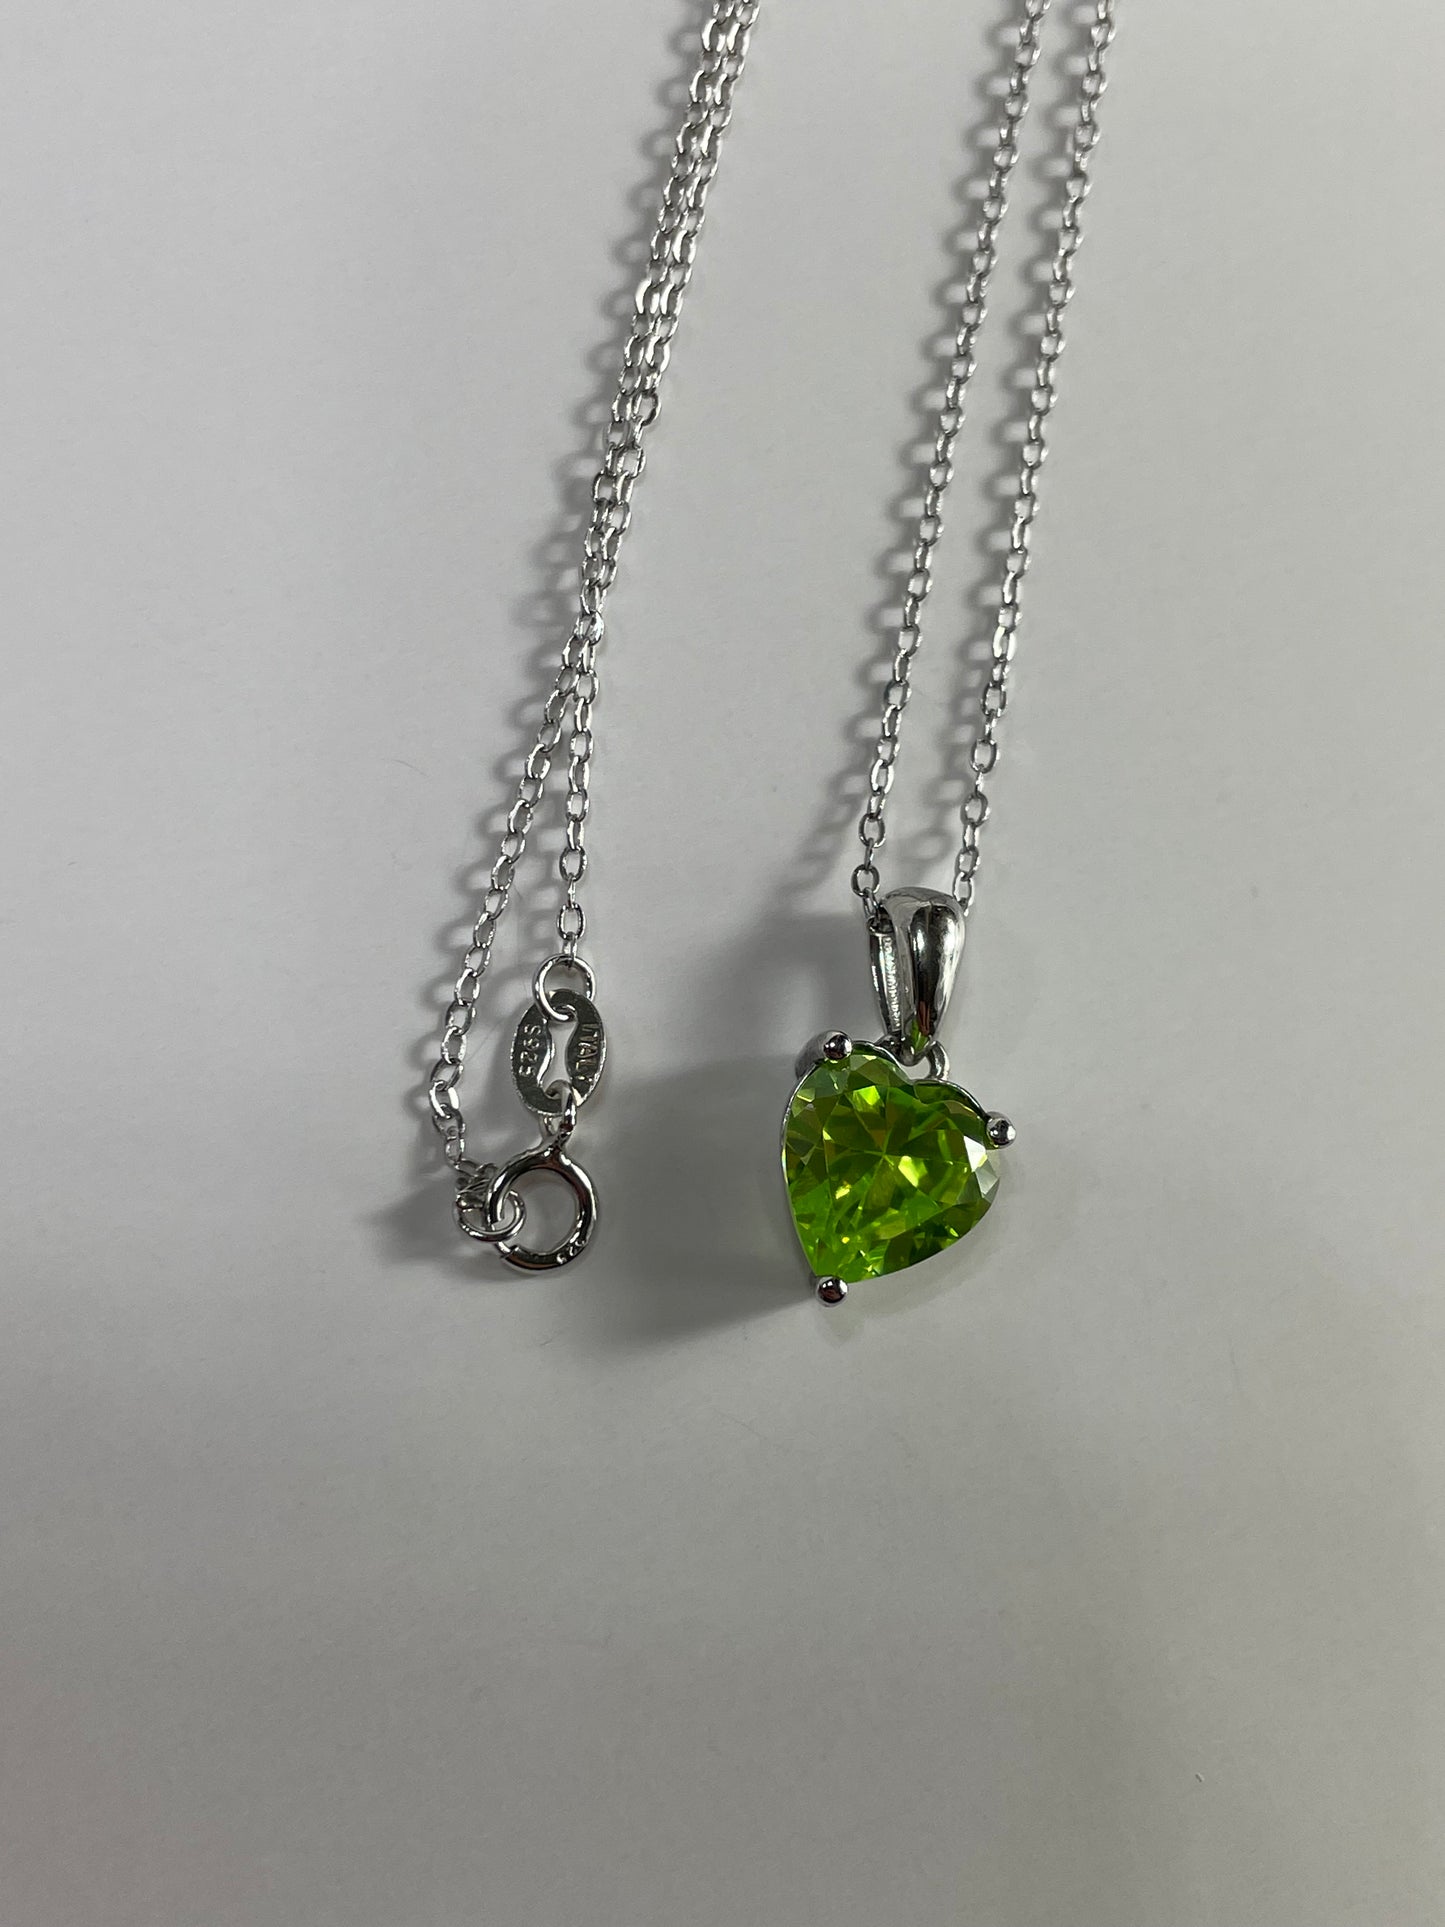 Sterling Silver Necklace with LIGHT GREEN Cubic Zirconia Heart Pendant